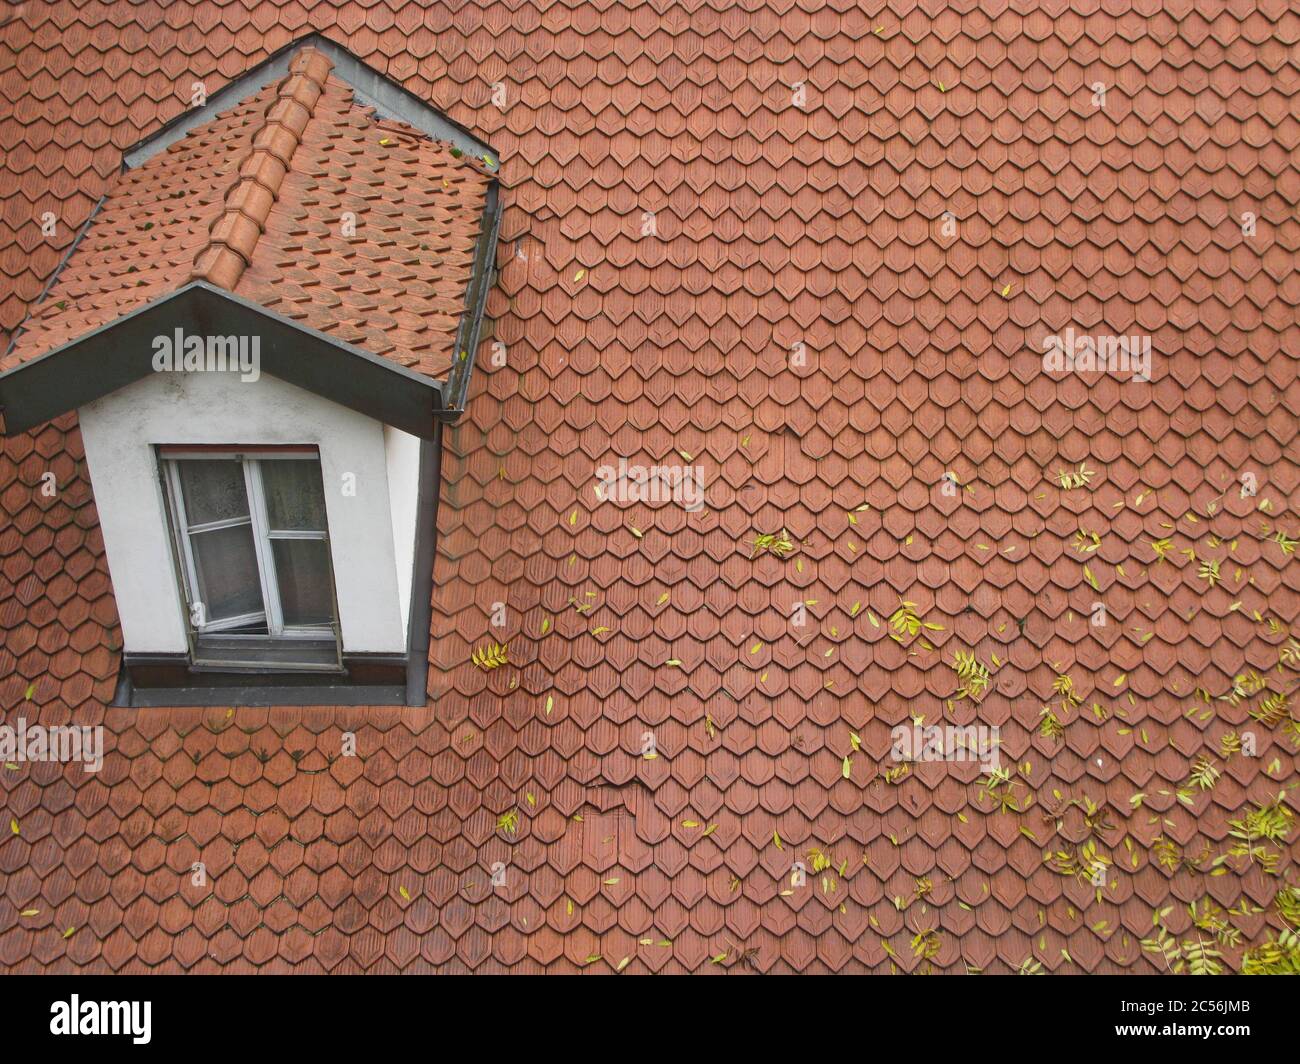 High angle shot of an orange-tiled house roof with a window Stock Photo